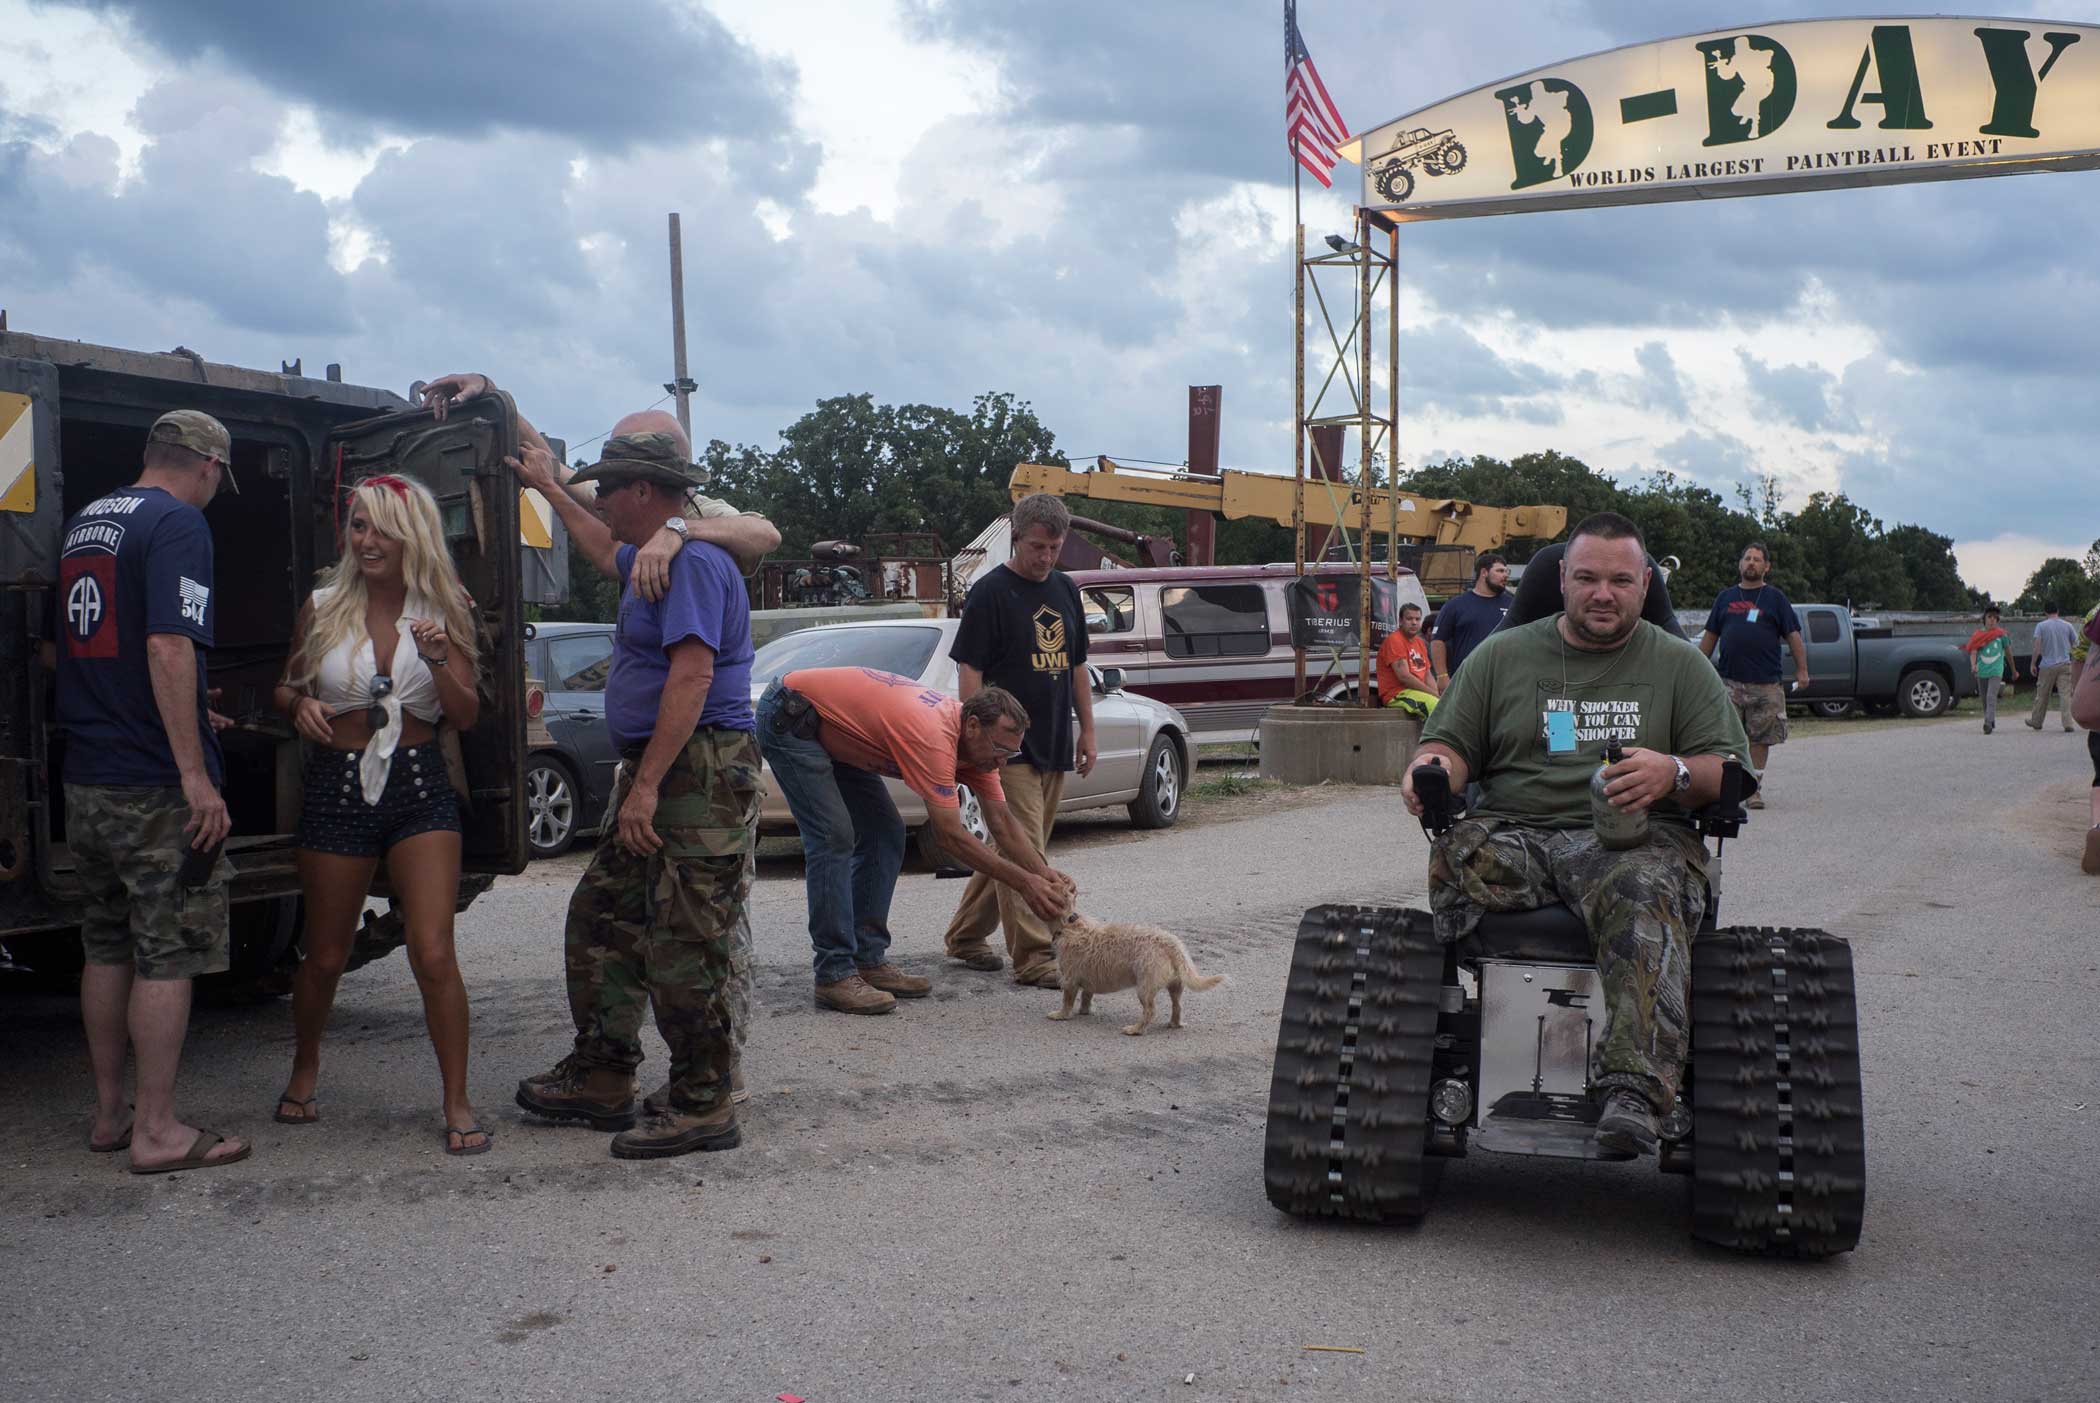 A young woman emerges from an operating M113 Armored Personnel Carrier that gives rides around the D-Day Adventure Park. On the right, Chris  Balls  Schneider, an amputee and Iraq veteran, rides a wheelchair invented by Team Defiant, an organization created by disabled vets to build all terrain wheelchairs.